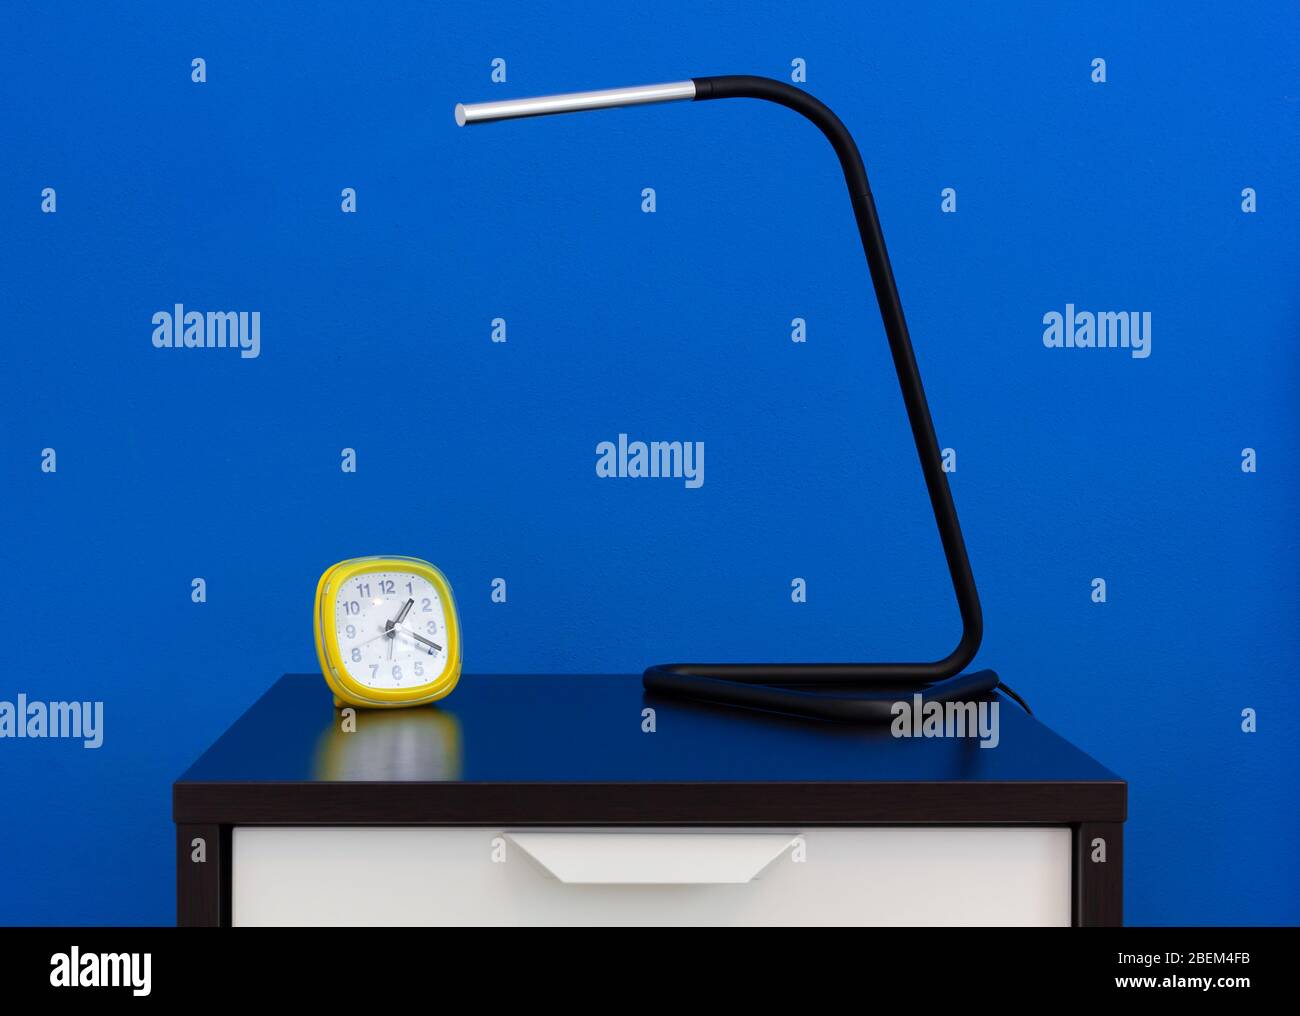 A modern lamp and an alarm clock on a nightstand against a blue colored interior wall Stock Photo